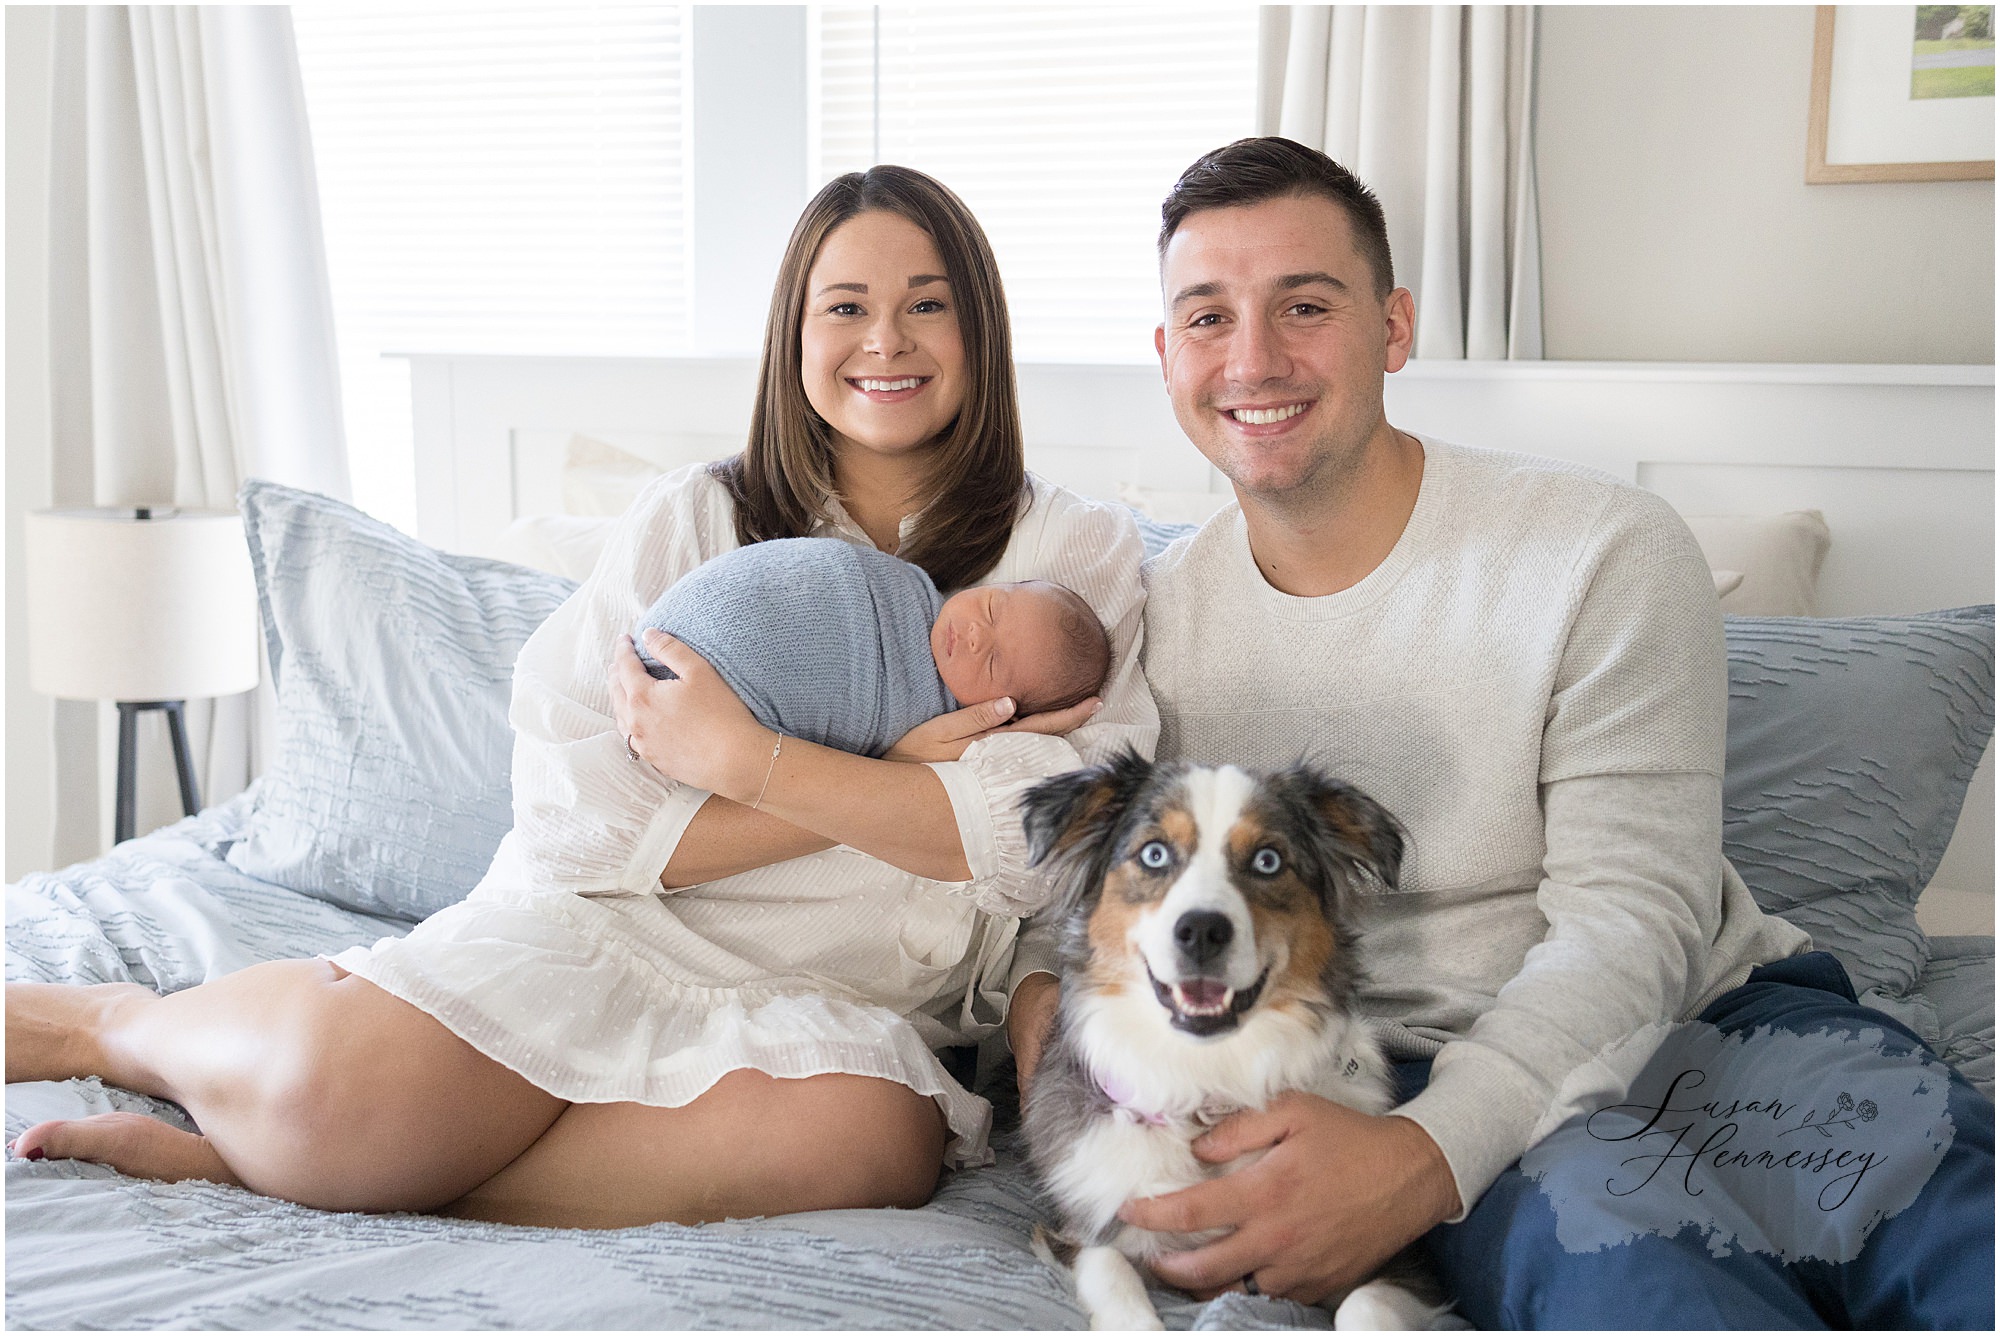 In Home Newborn Photographer with the family dog.